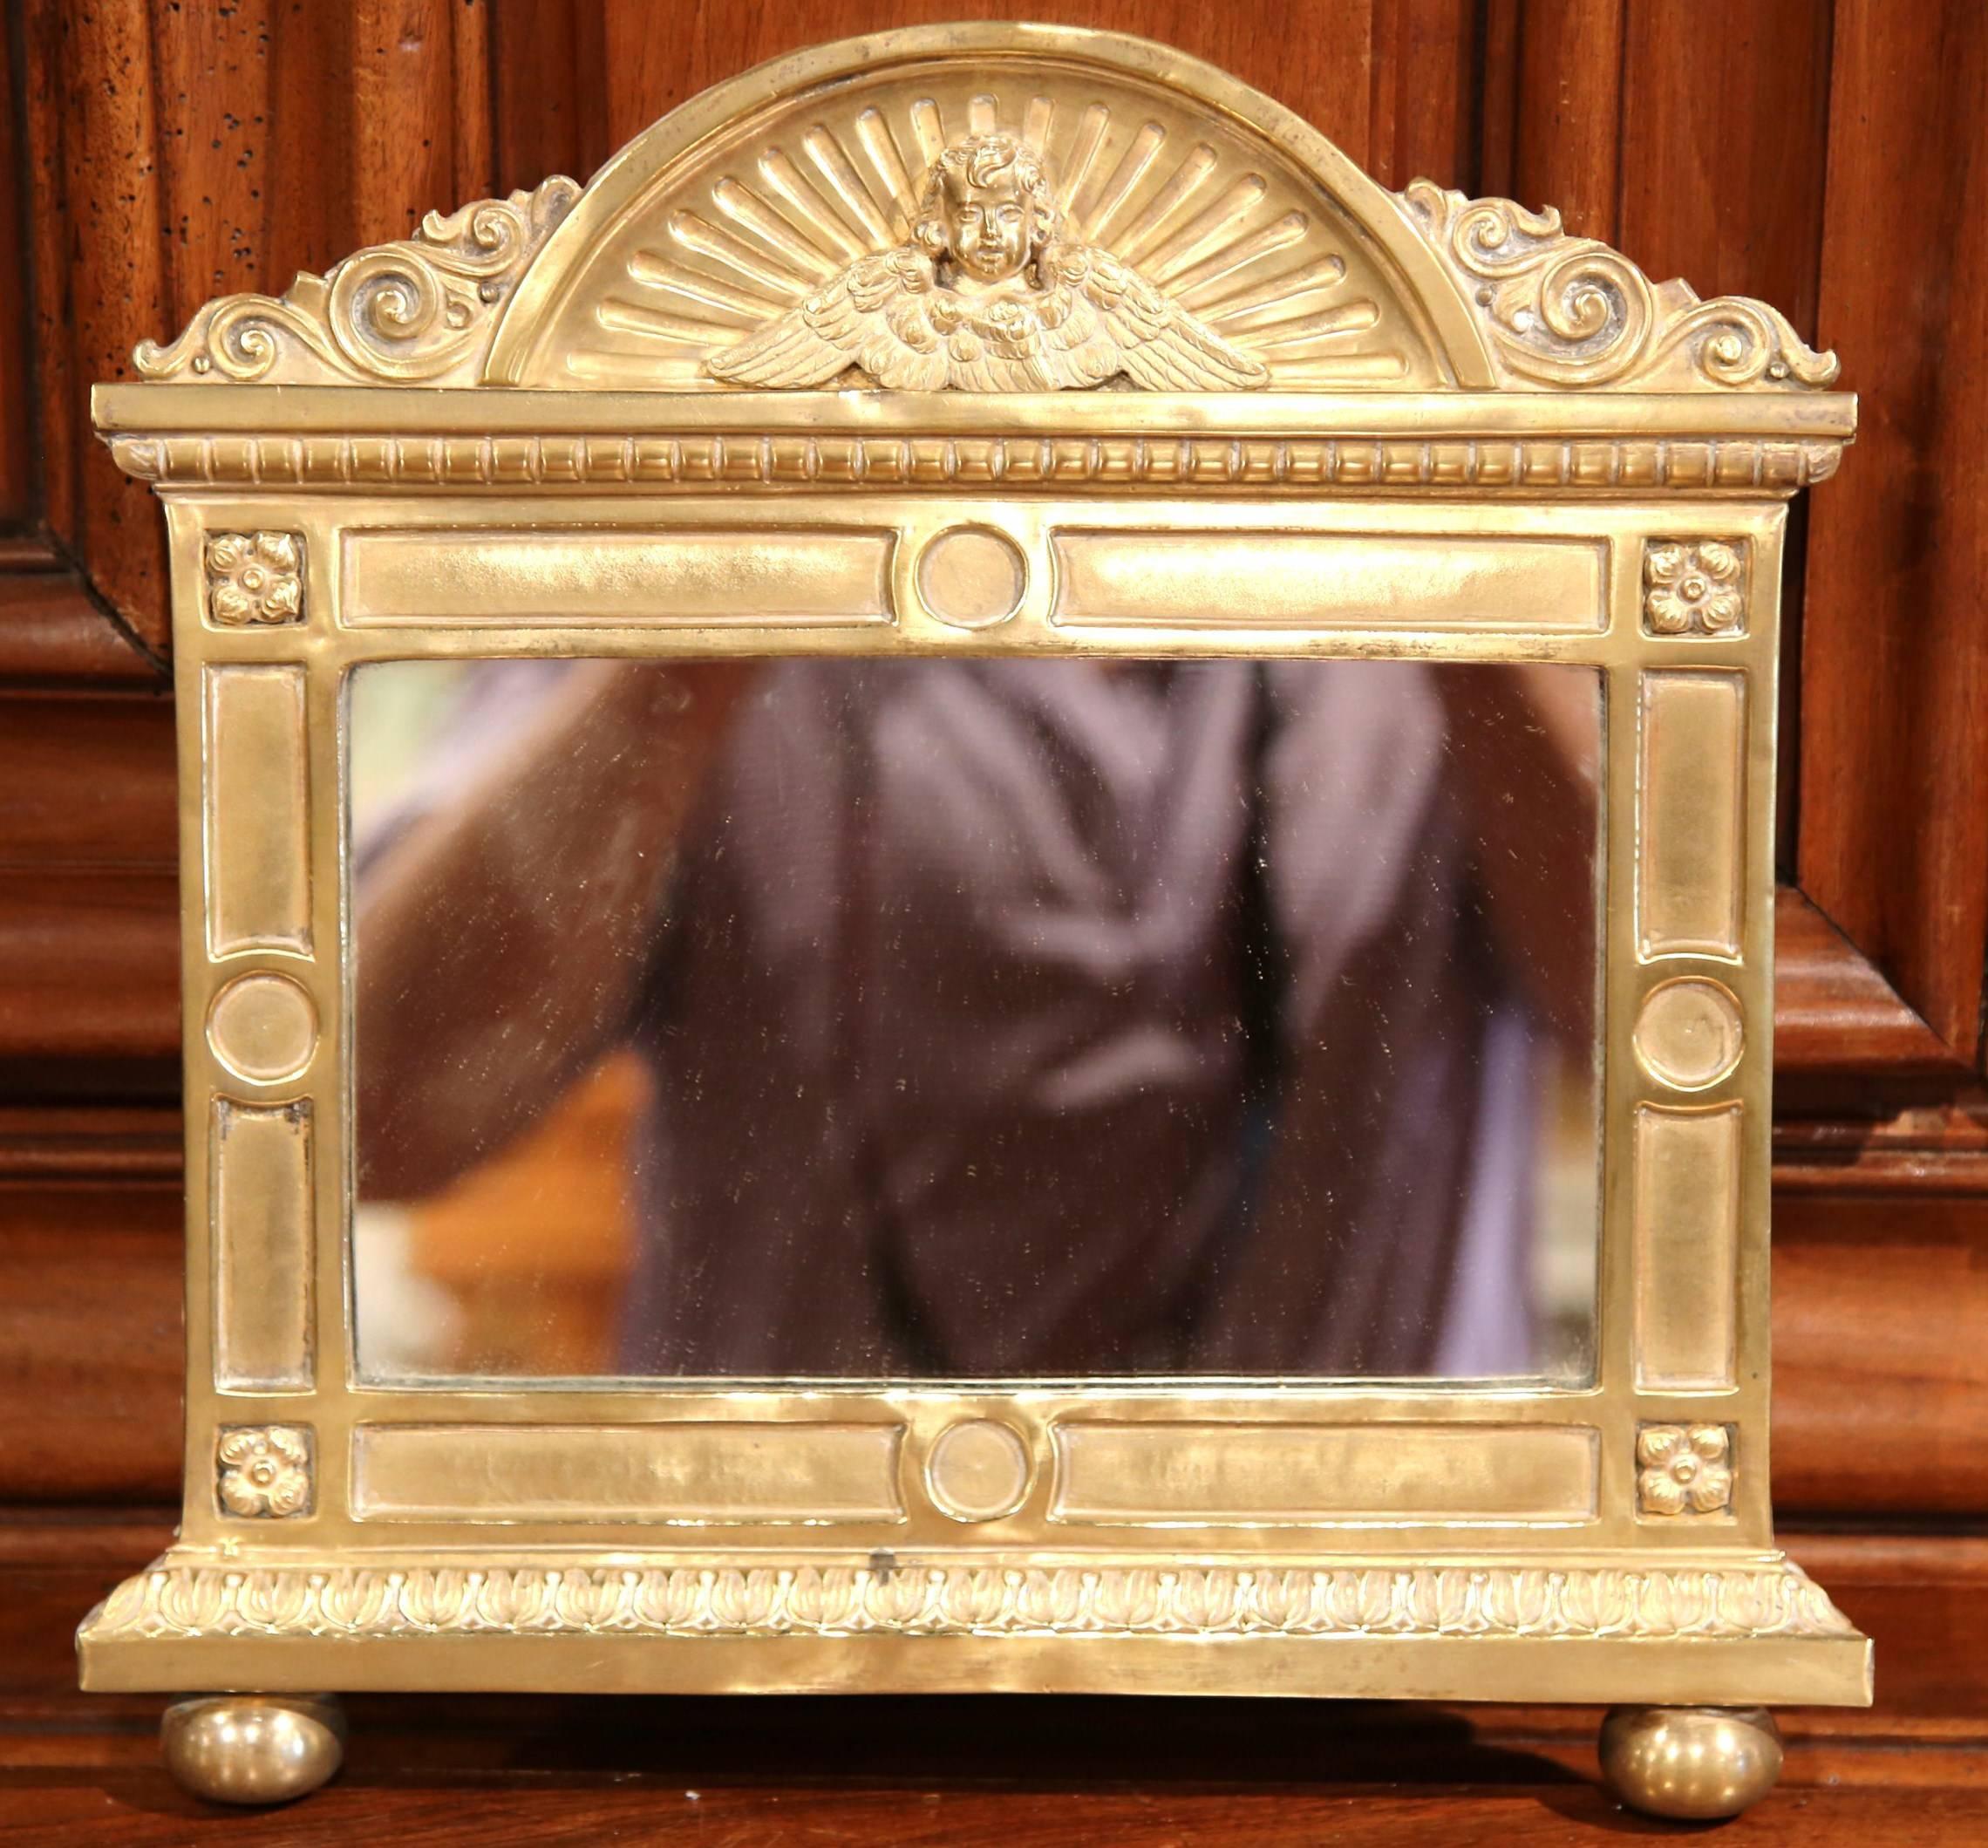 19th Century French Repousse Brass Wall Mirror with Cherub Face Decor For Sale 4